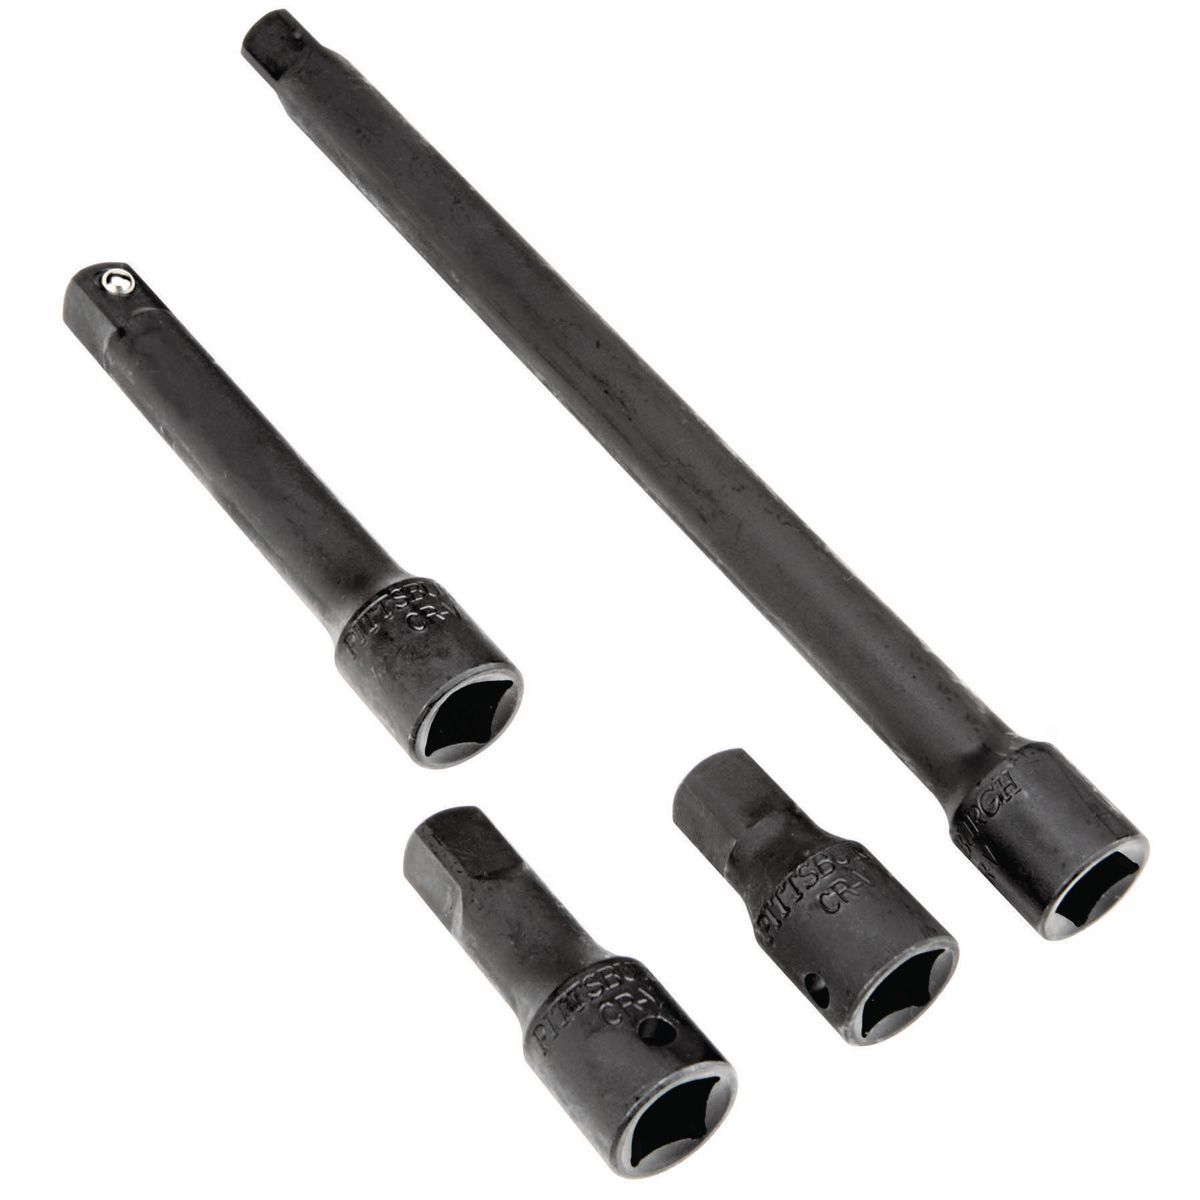 PITTSBURGH 1/2 in. Drive Impact Socket Extension Set, 4 Piece